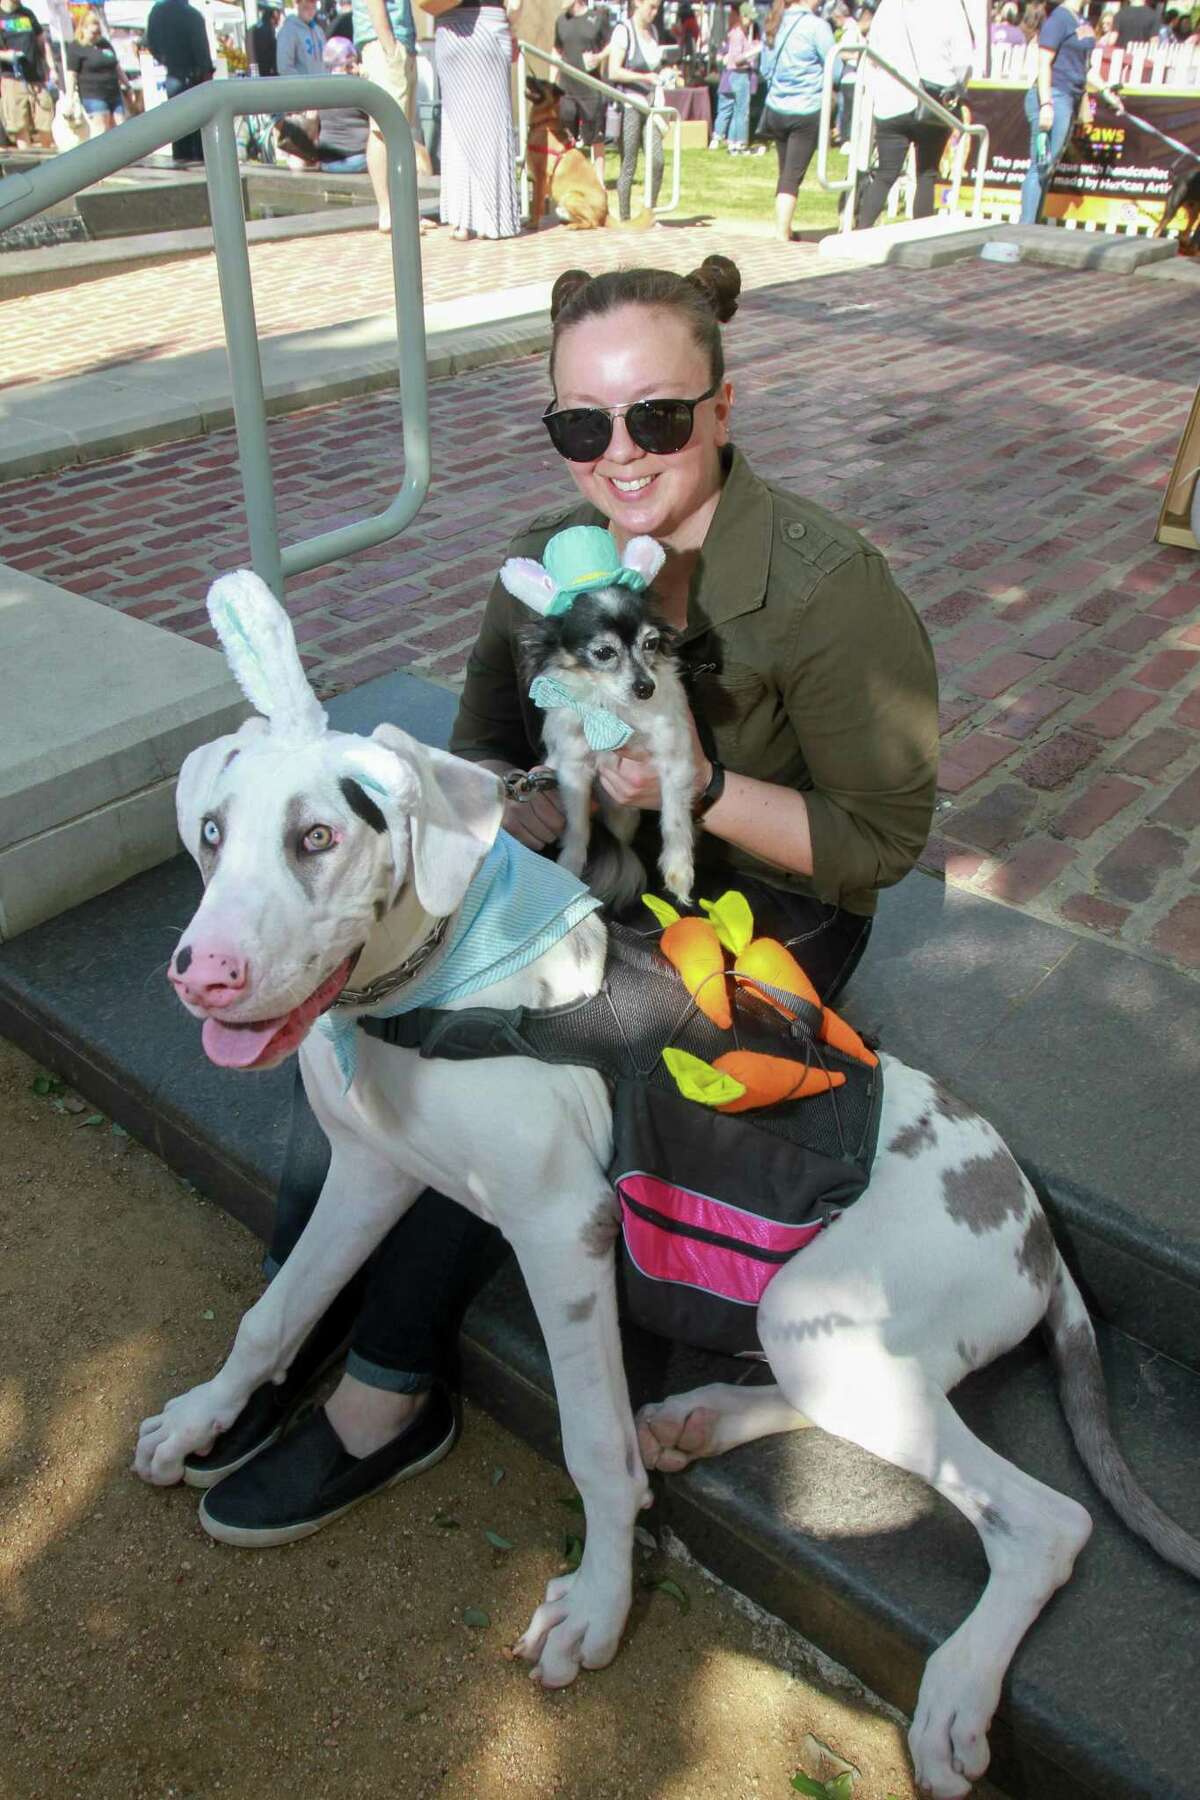 Kristina Morgan with her Great Dane, Domino, and Chihuahua, Charlie, at Puppies for Breakfast, which celebrated 8 years as the largest dog festival in Houston.